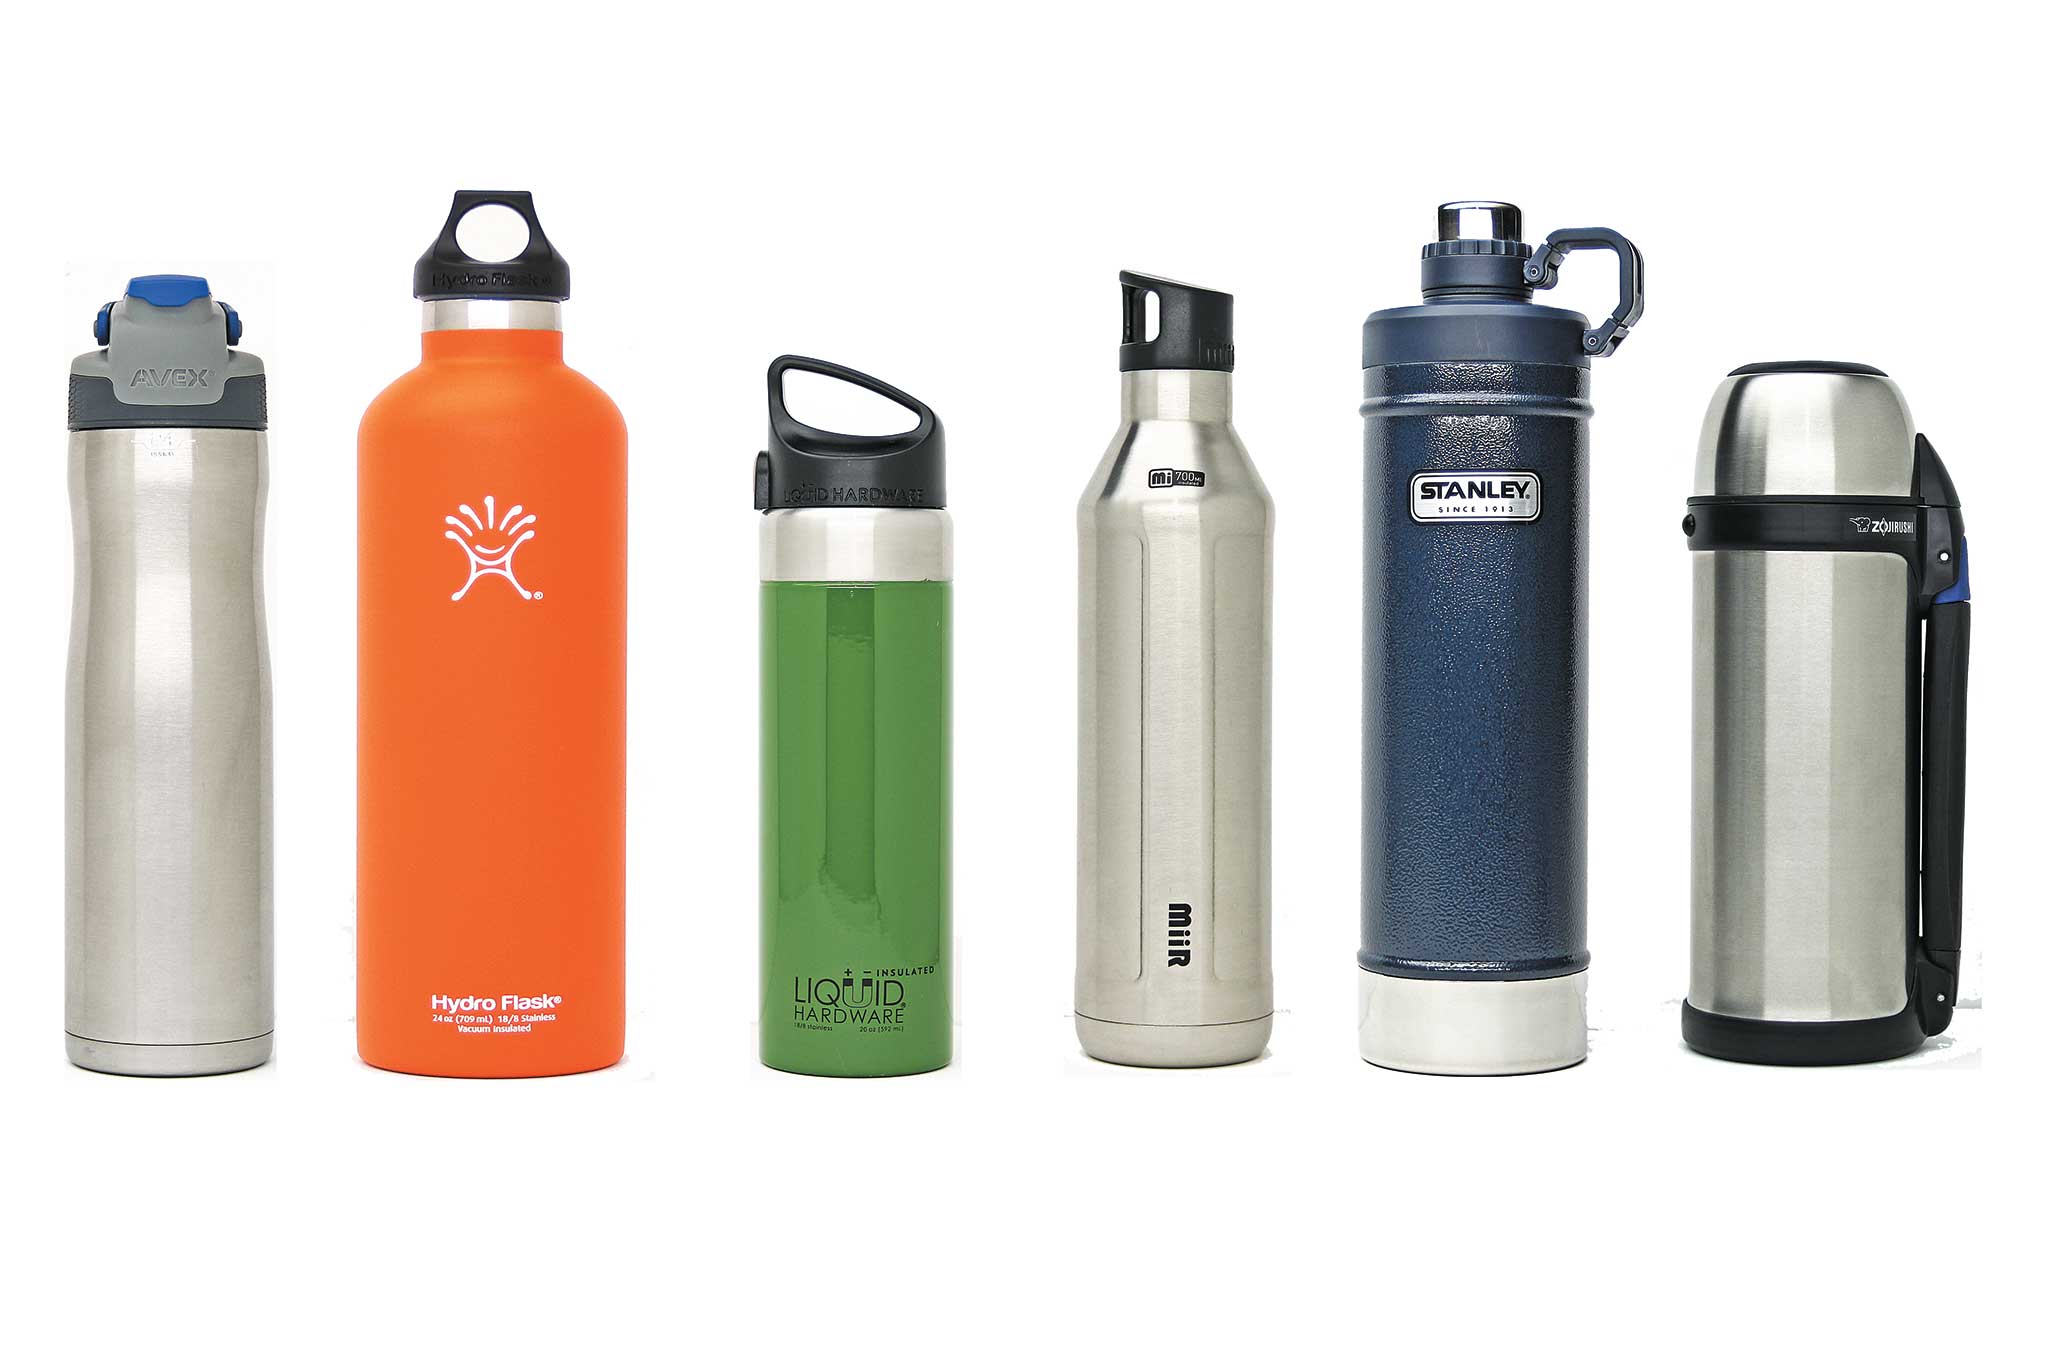 https://offgridweb.com/wp-content/uploads/2015/10/stainless-steel-water-bottles-temperature-test.jpg